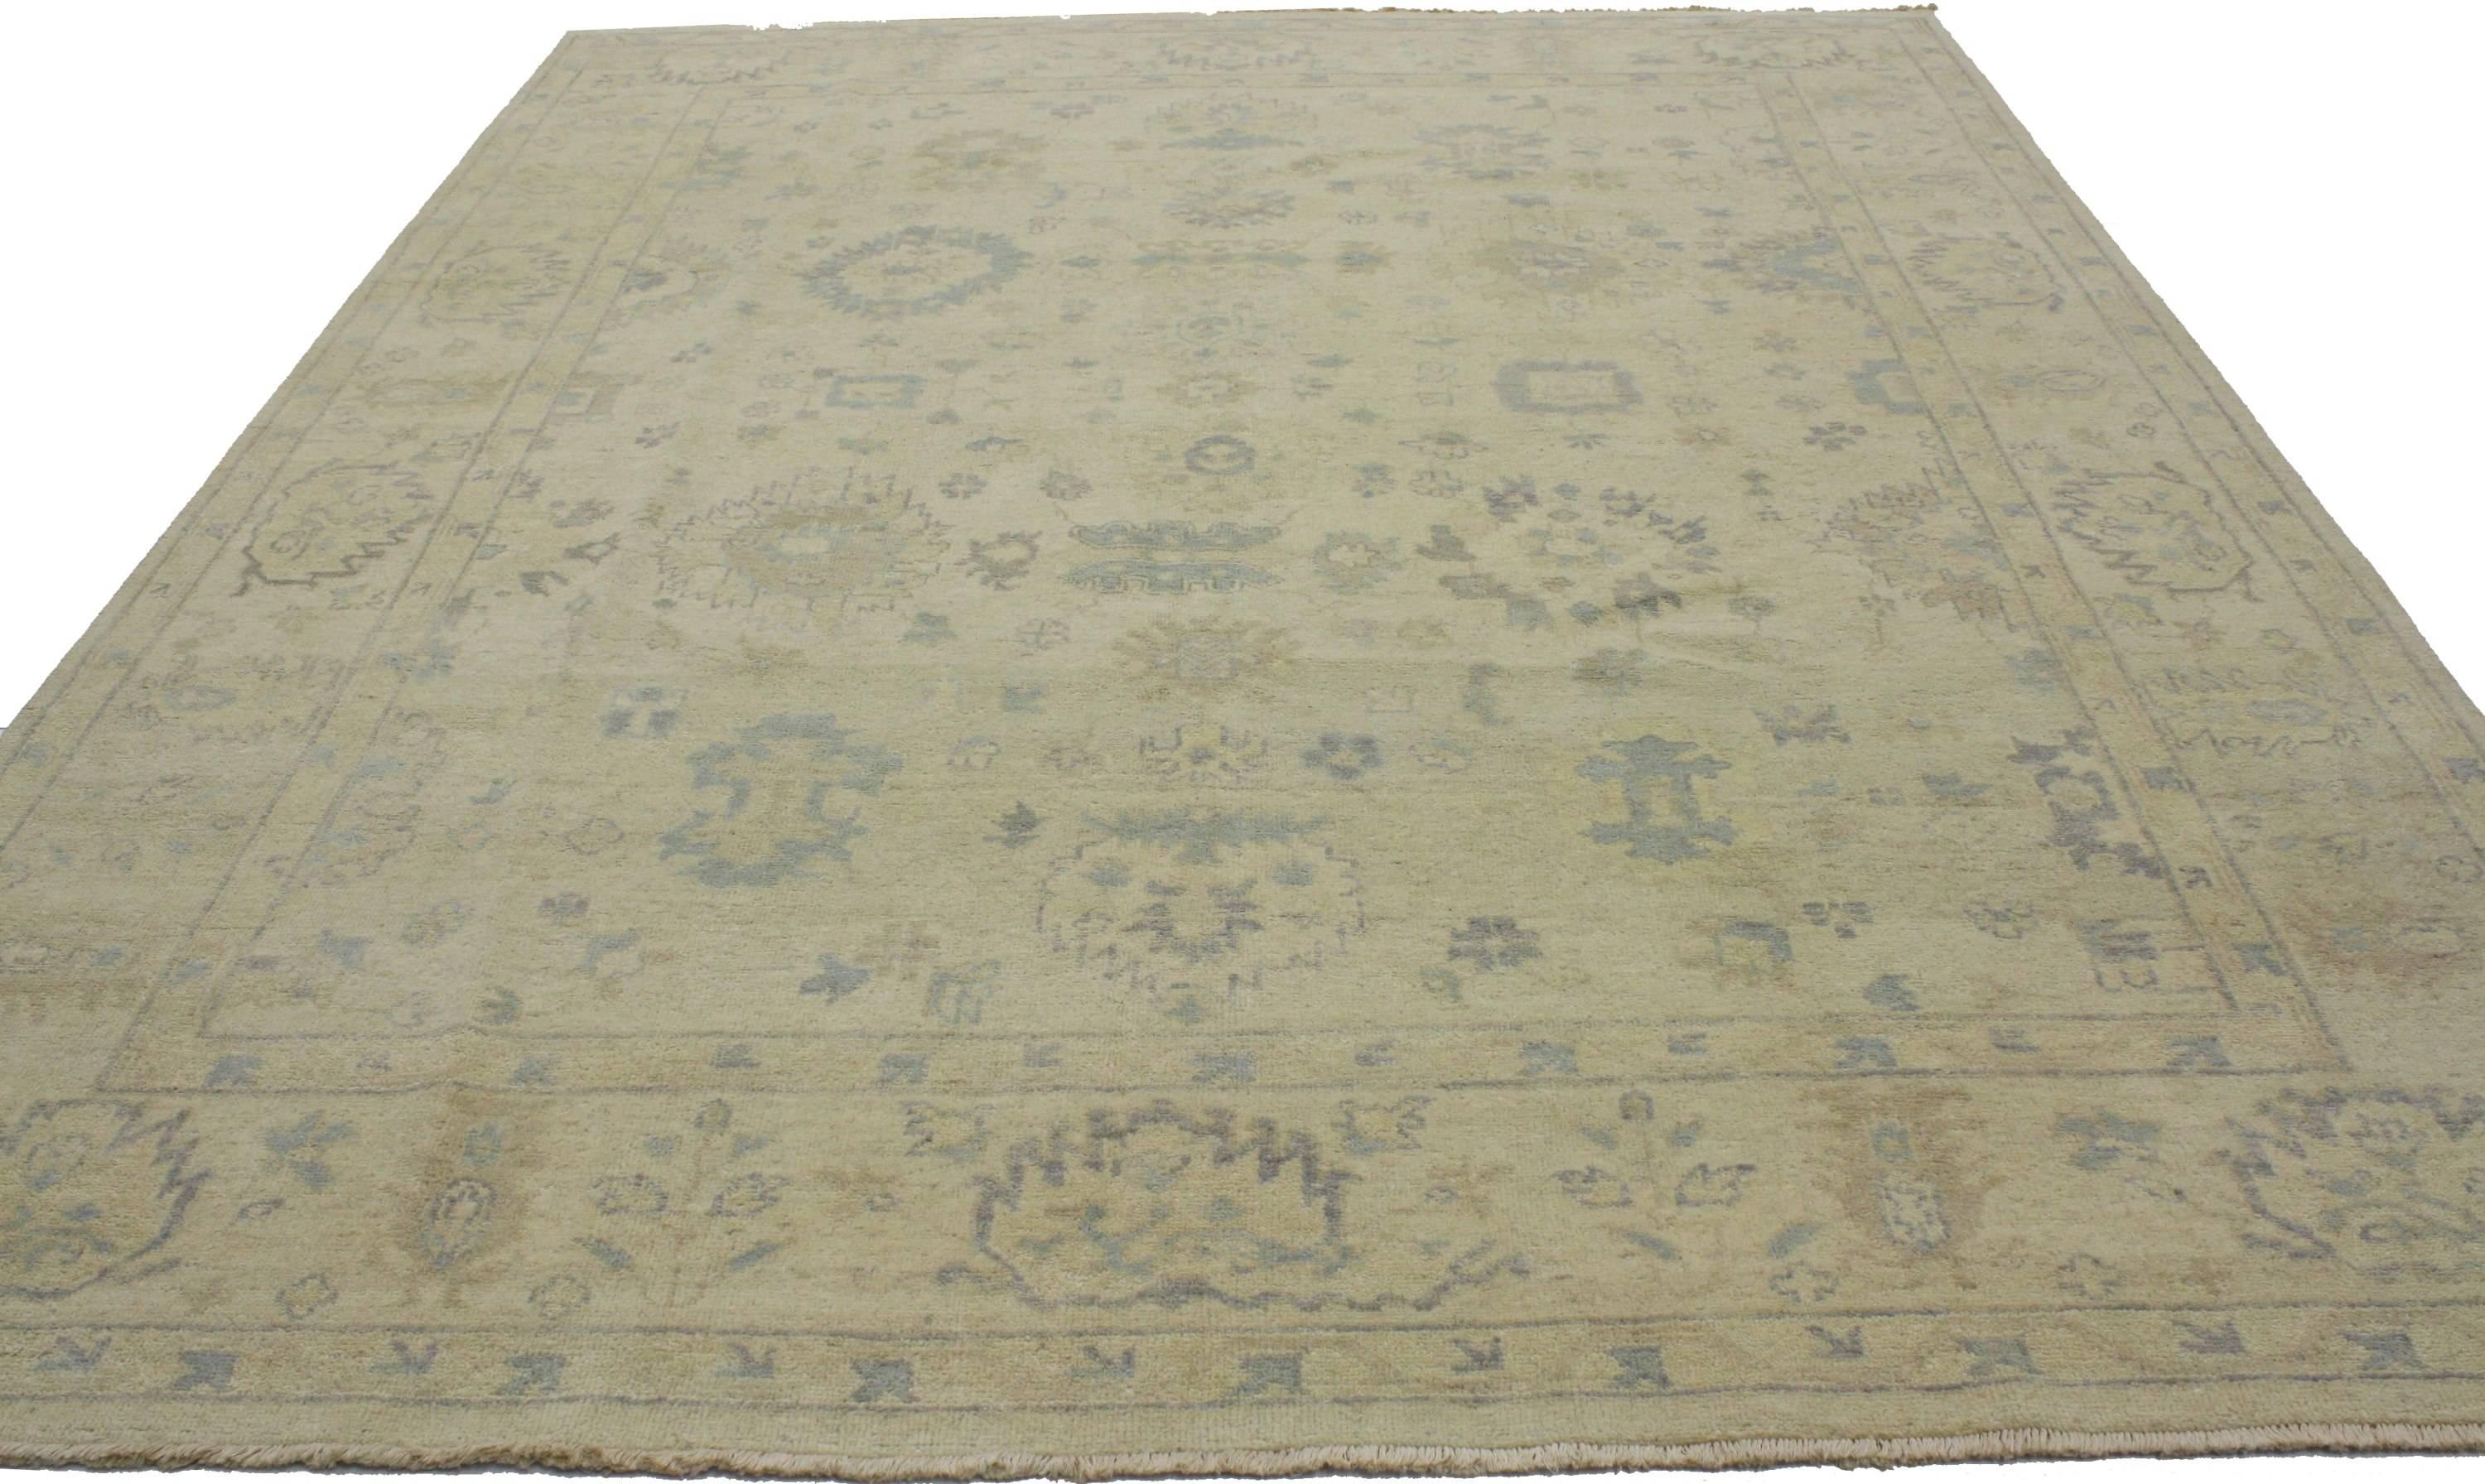 30201 New Contemporary Oushak Area Rug with Coastal Cottage Style. Blending Coastal Cottage style and elements from the modern world, this hand knotted wool contemporary Oushak rug beautifully balances new and old. It features an all over geometric